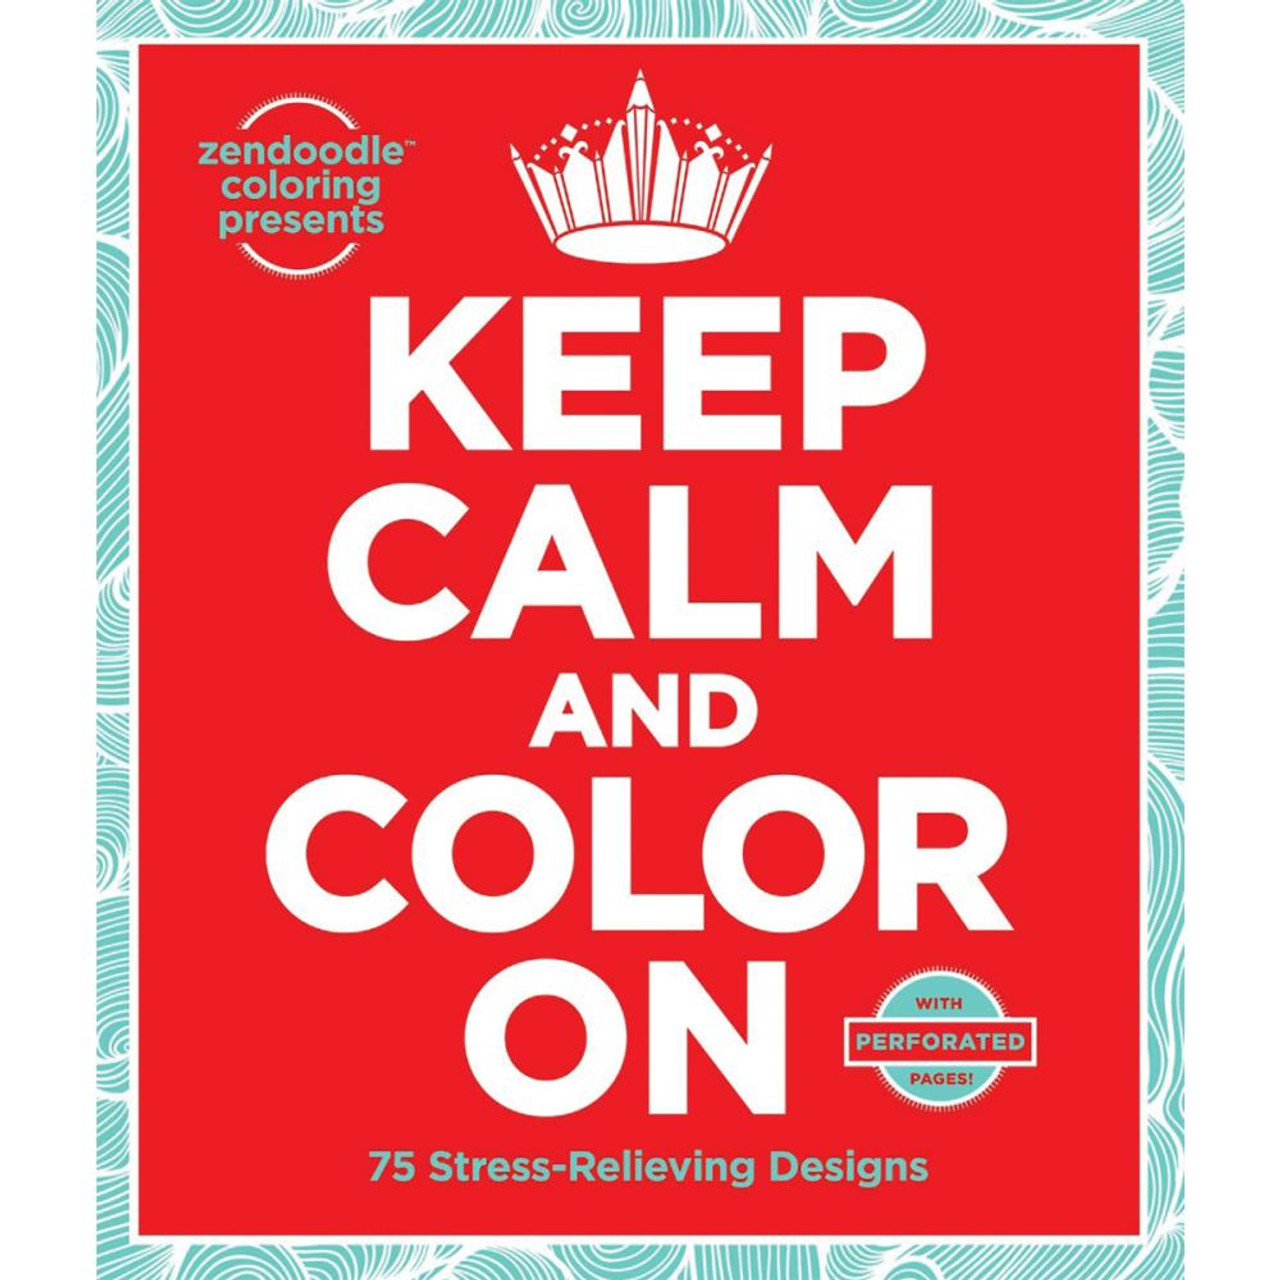 Clearance zendoodle coloring presents keep calm and color on